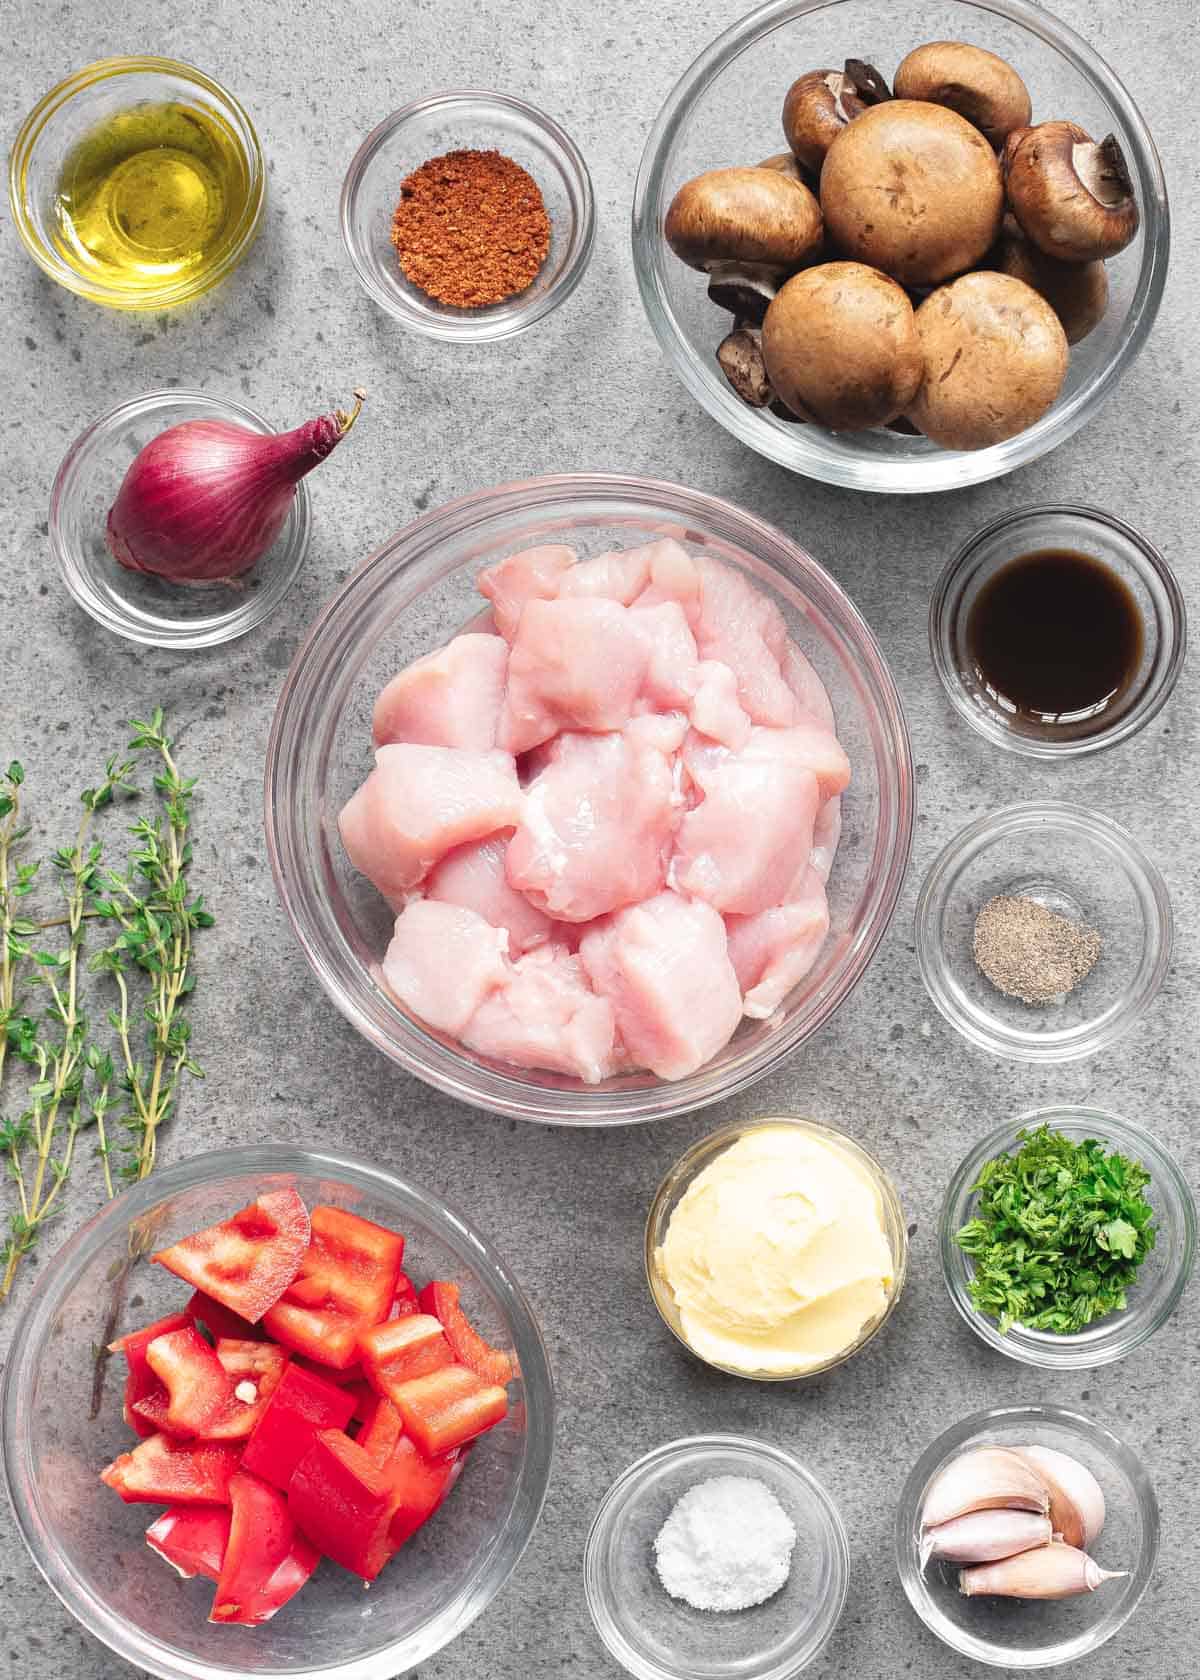 Ingredients to make chicken bites in glass bowls on a gray background.